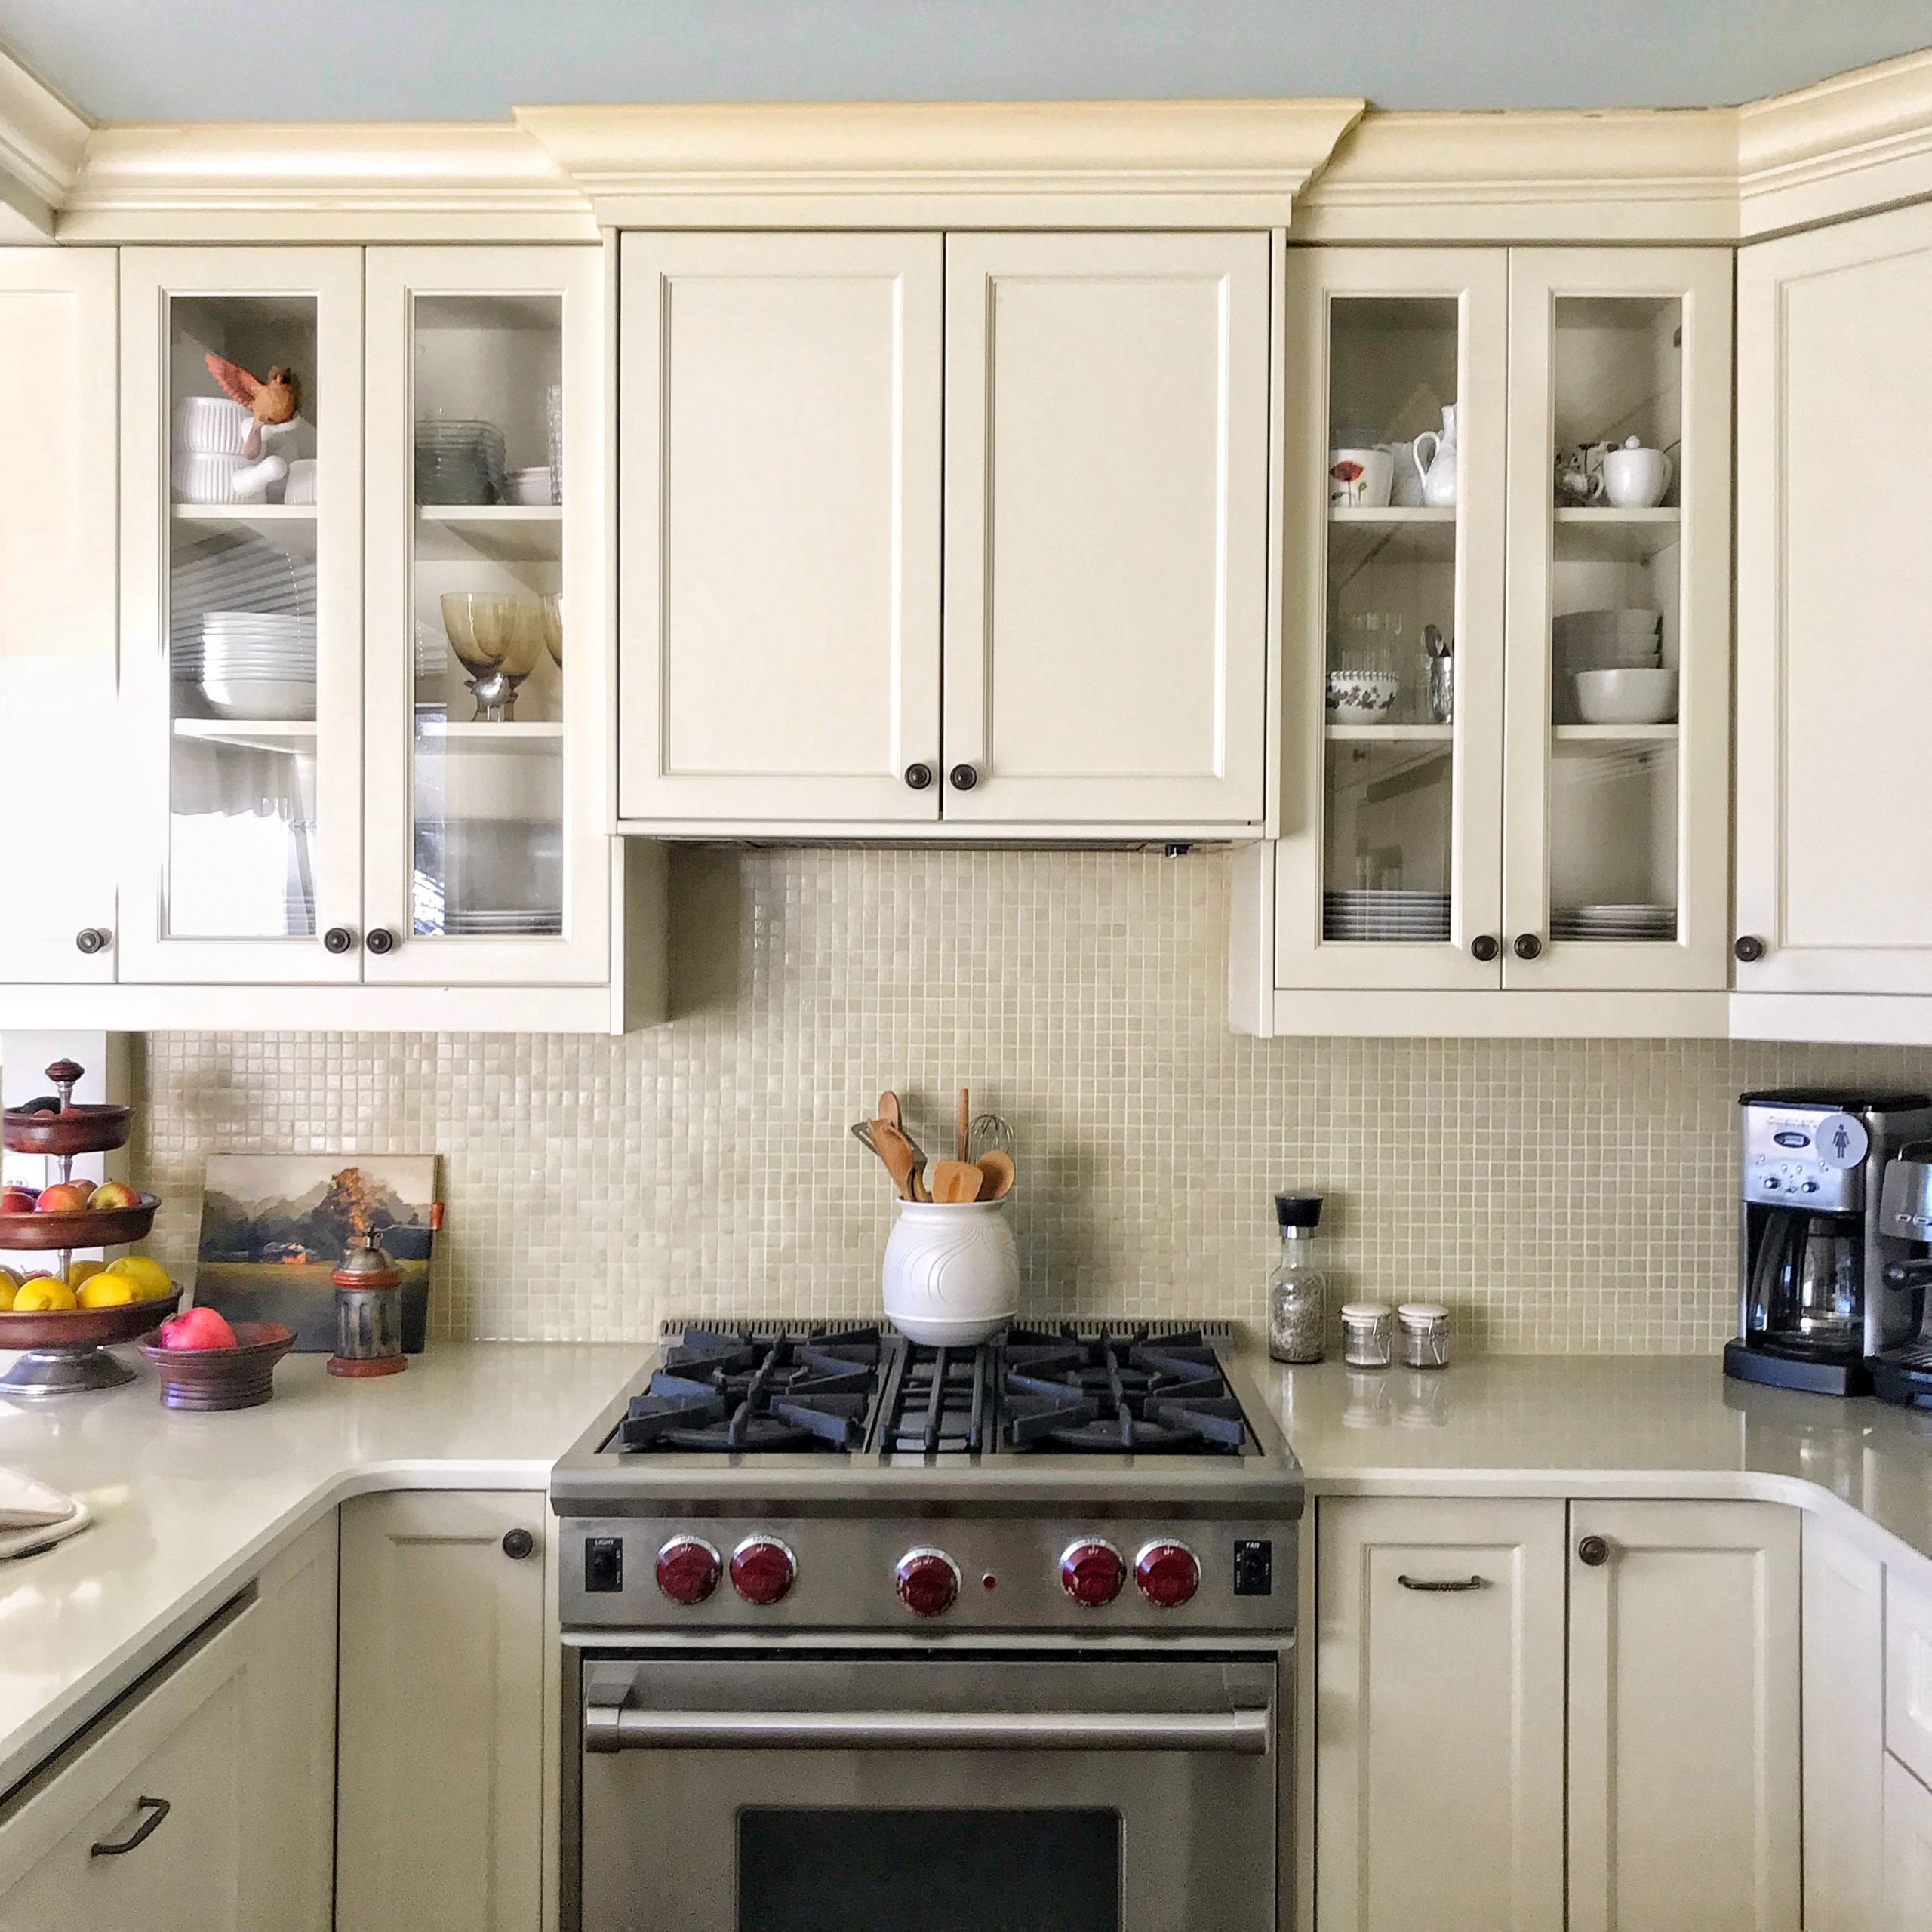 Small Kitchen With Exhaust Fan Hidden Up Inside Cabinetry within sizing 3013 X 3013